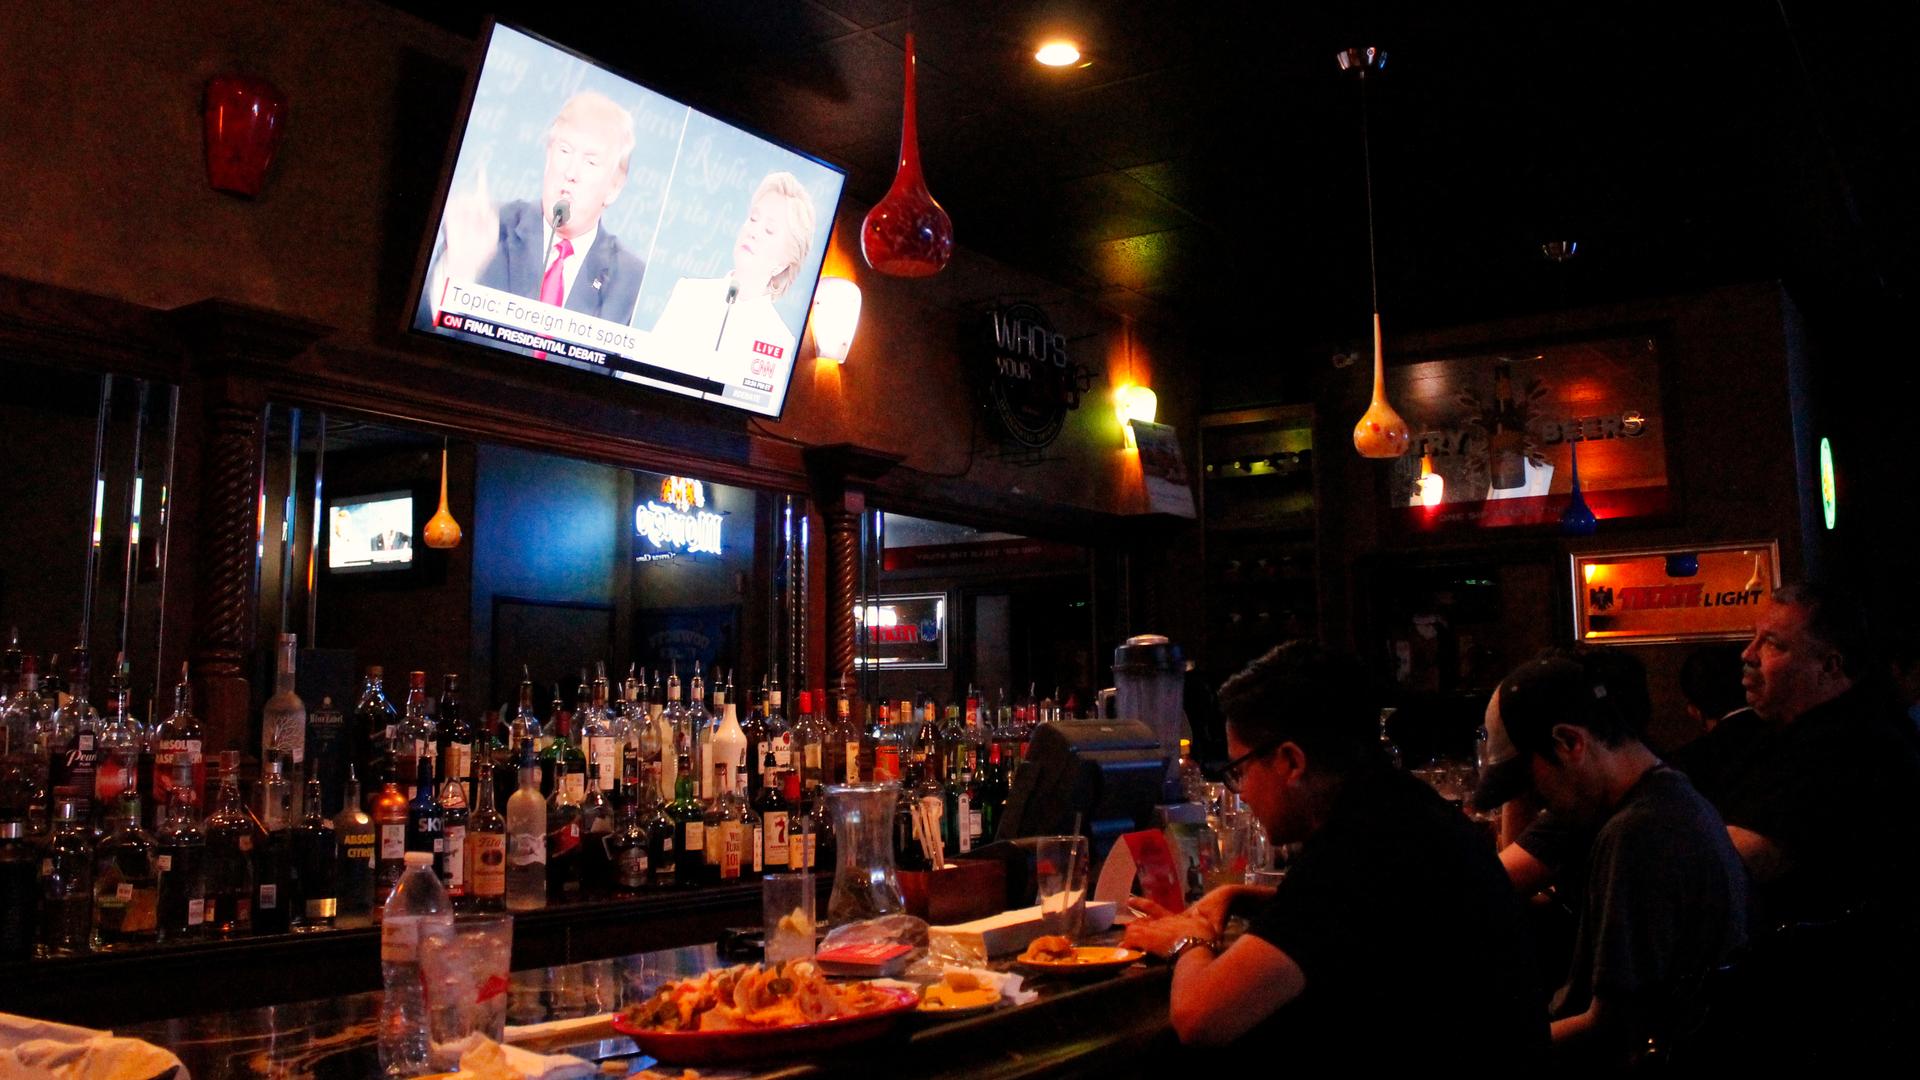 People sitting at a bar with a screen showing Donald Trump and Hillary Clinton above